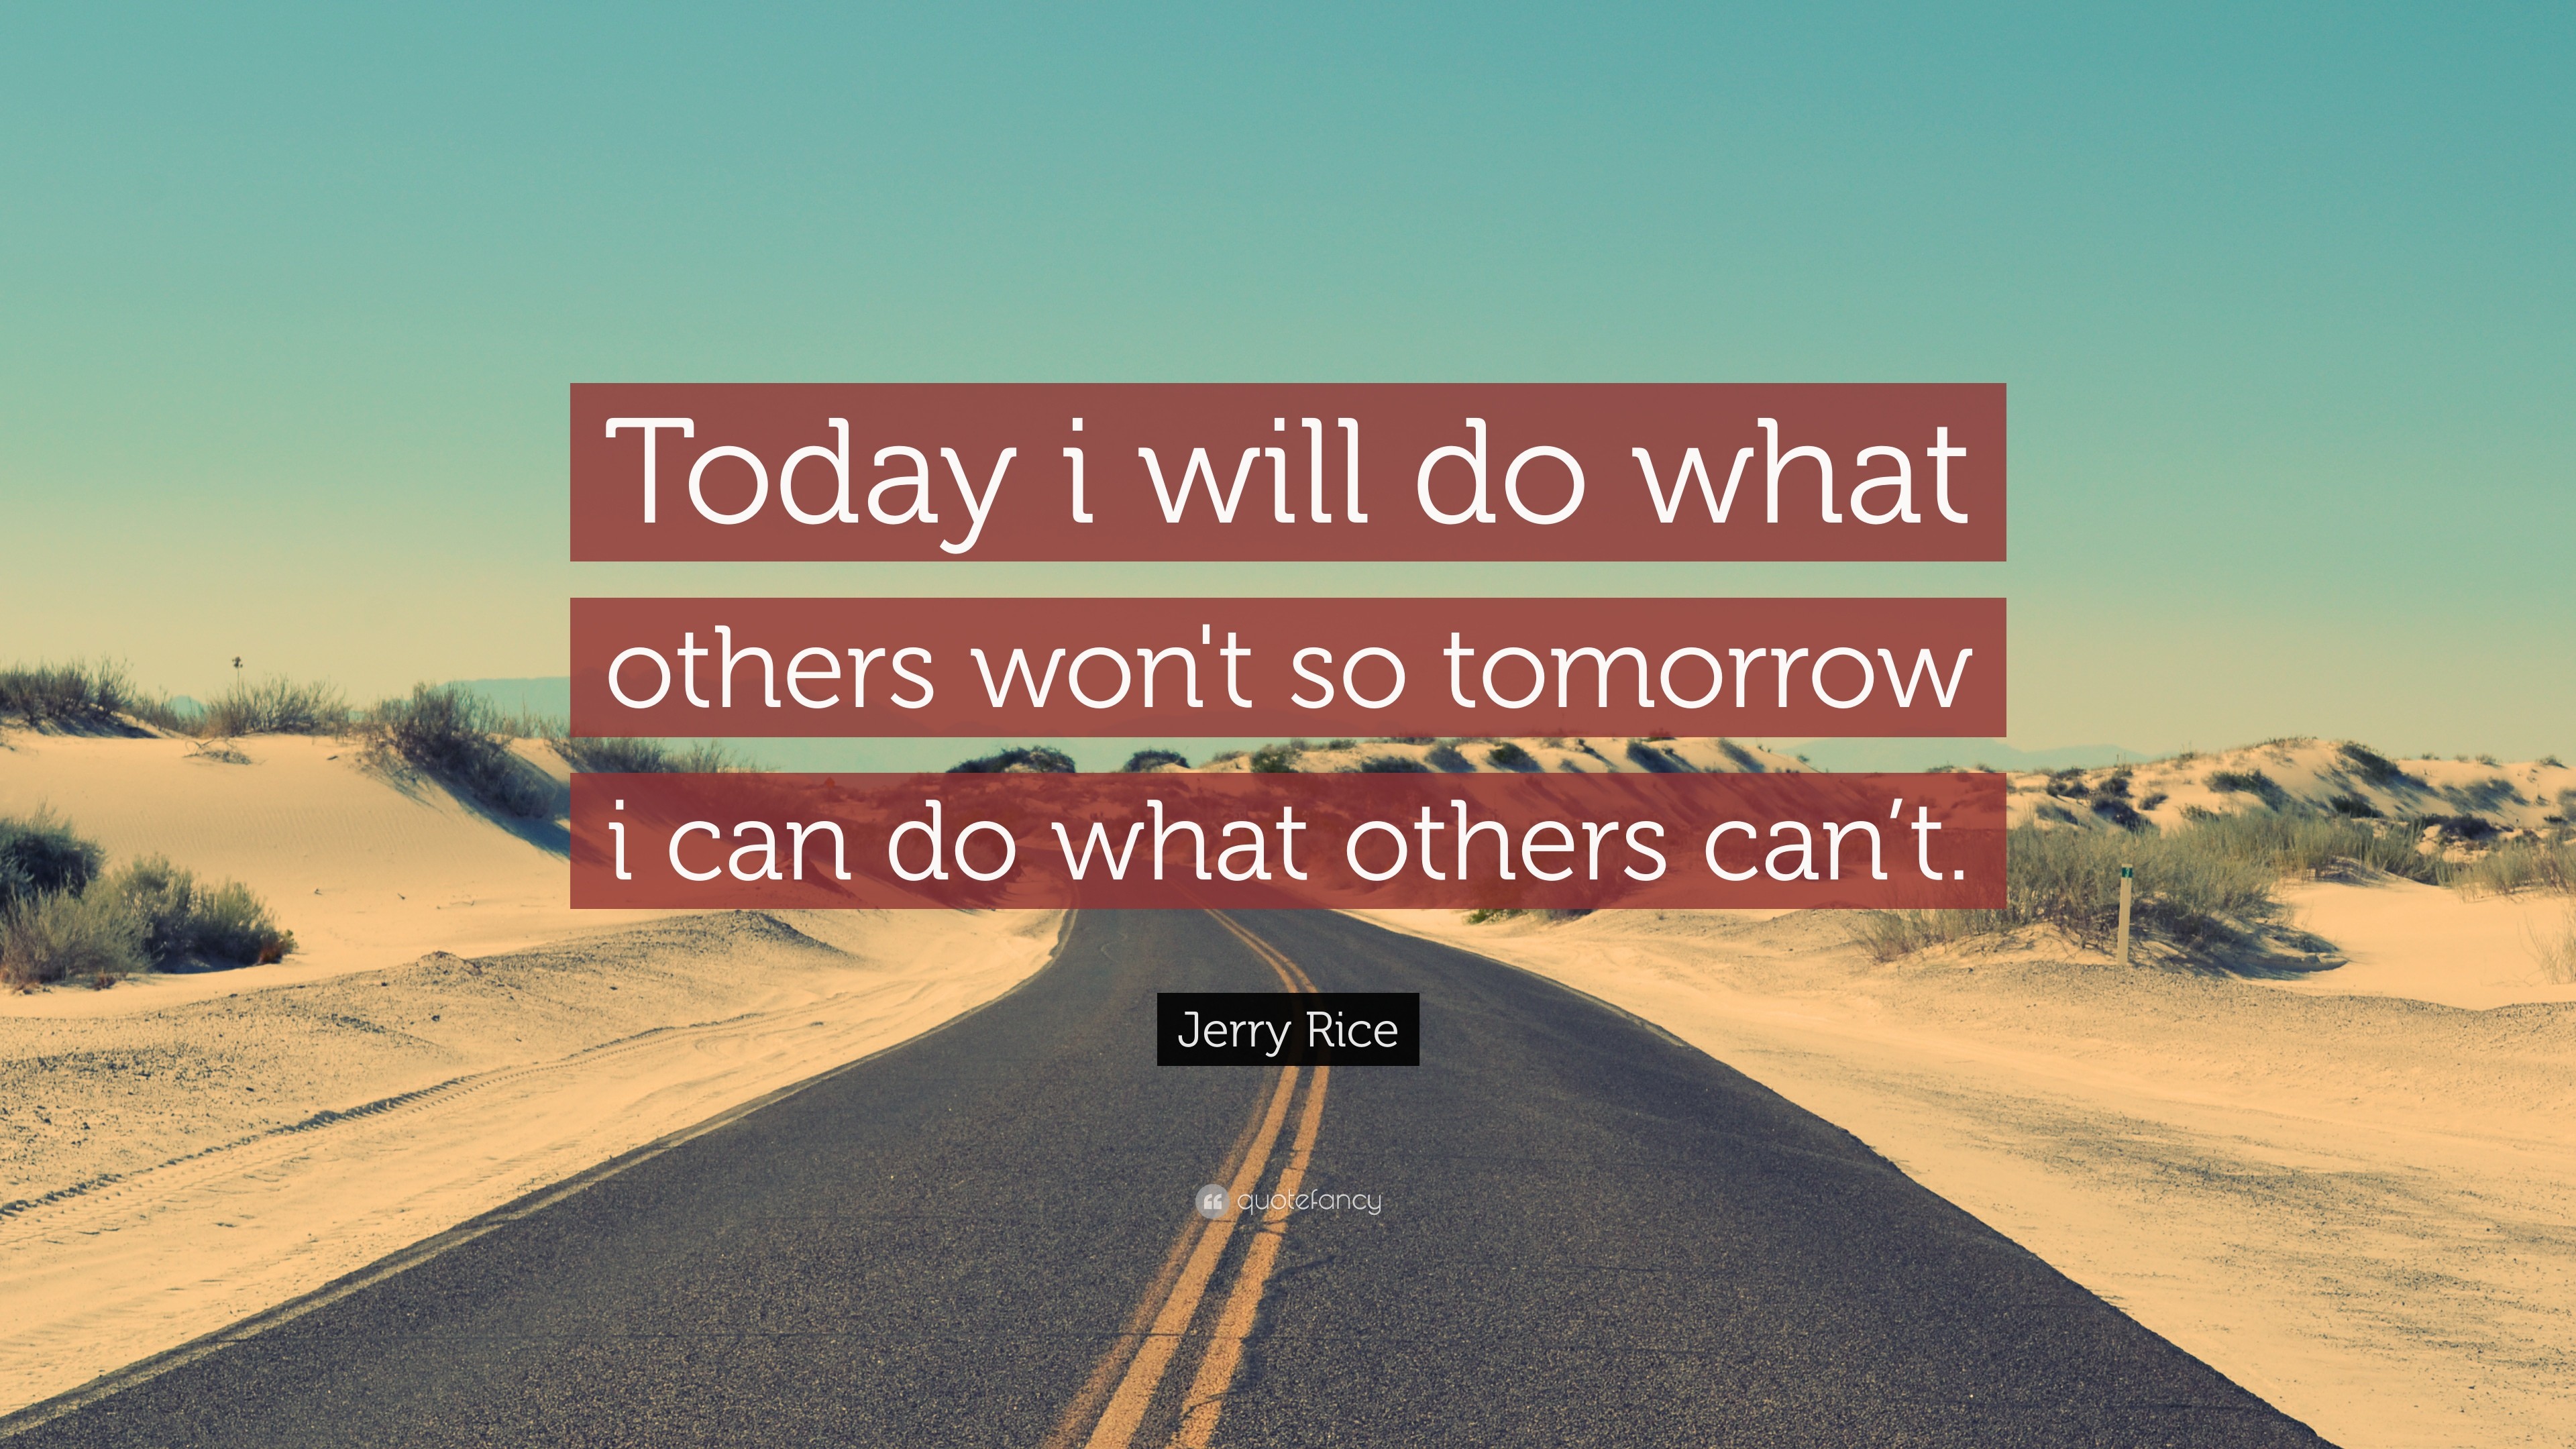 3840x2160 Jerry Rice Quote: “Today i will do what others won't so tomorrow